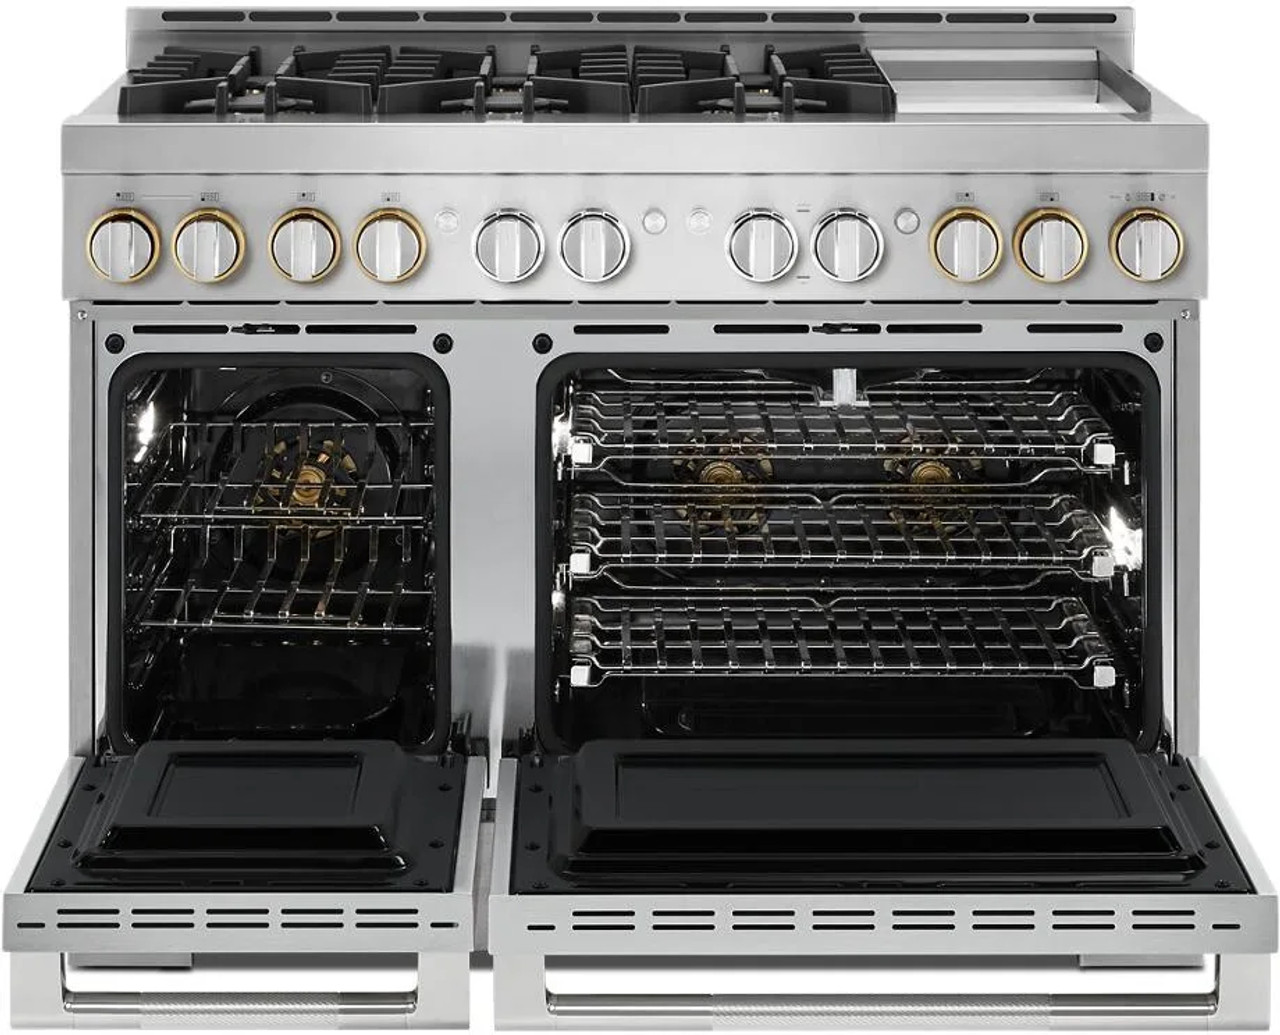 Jenn-Air JGRP548HL01 48" Rise Gas Professional-Style Range with Chrome-Infused Griddle - Stainless Steel